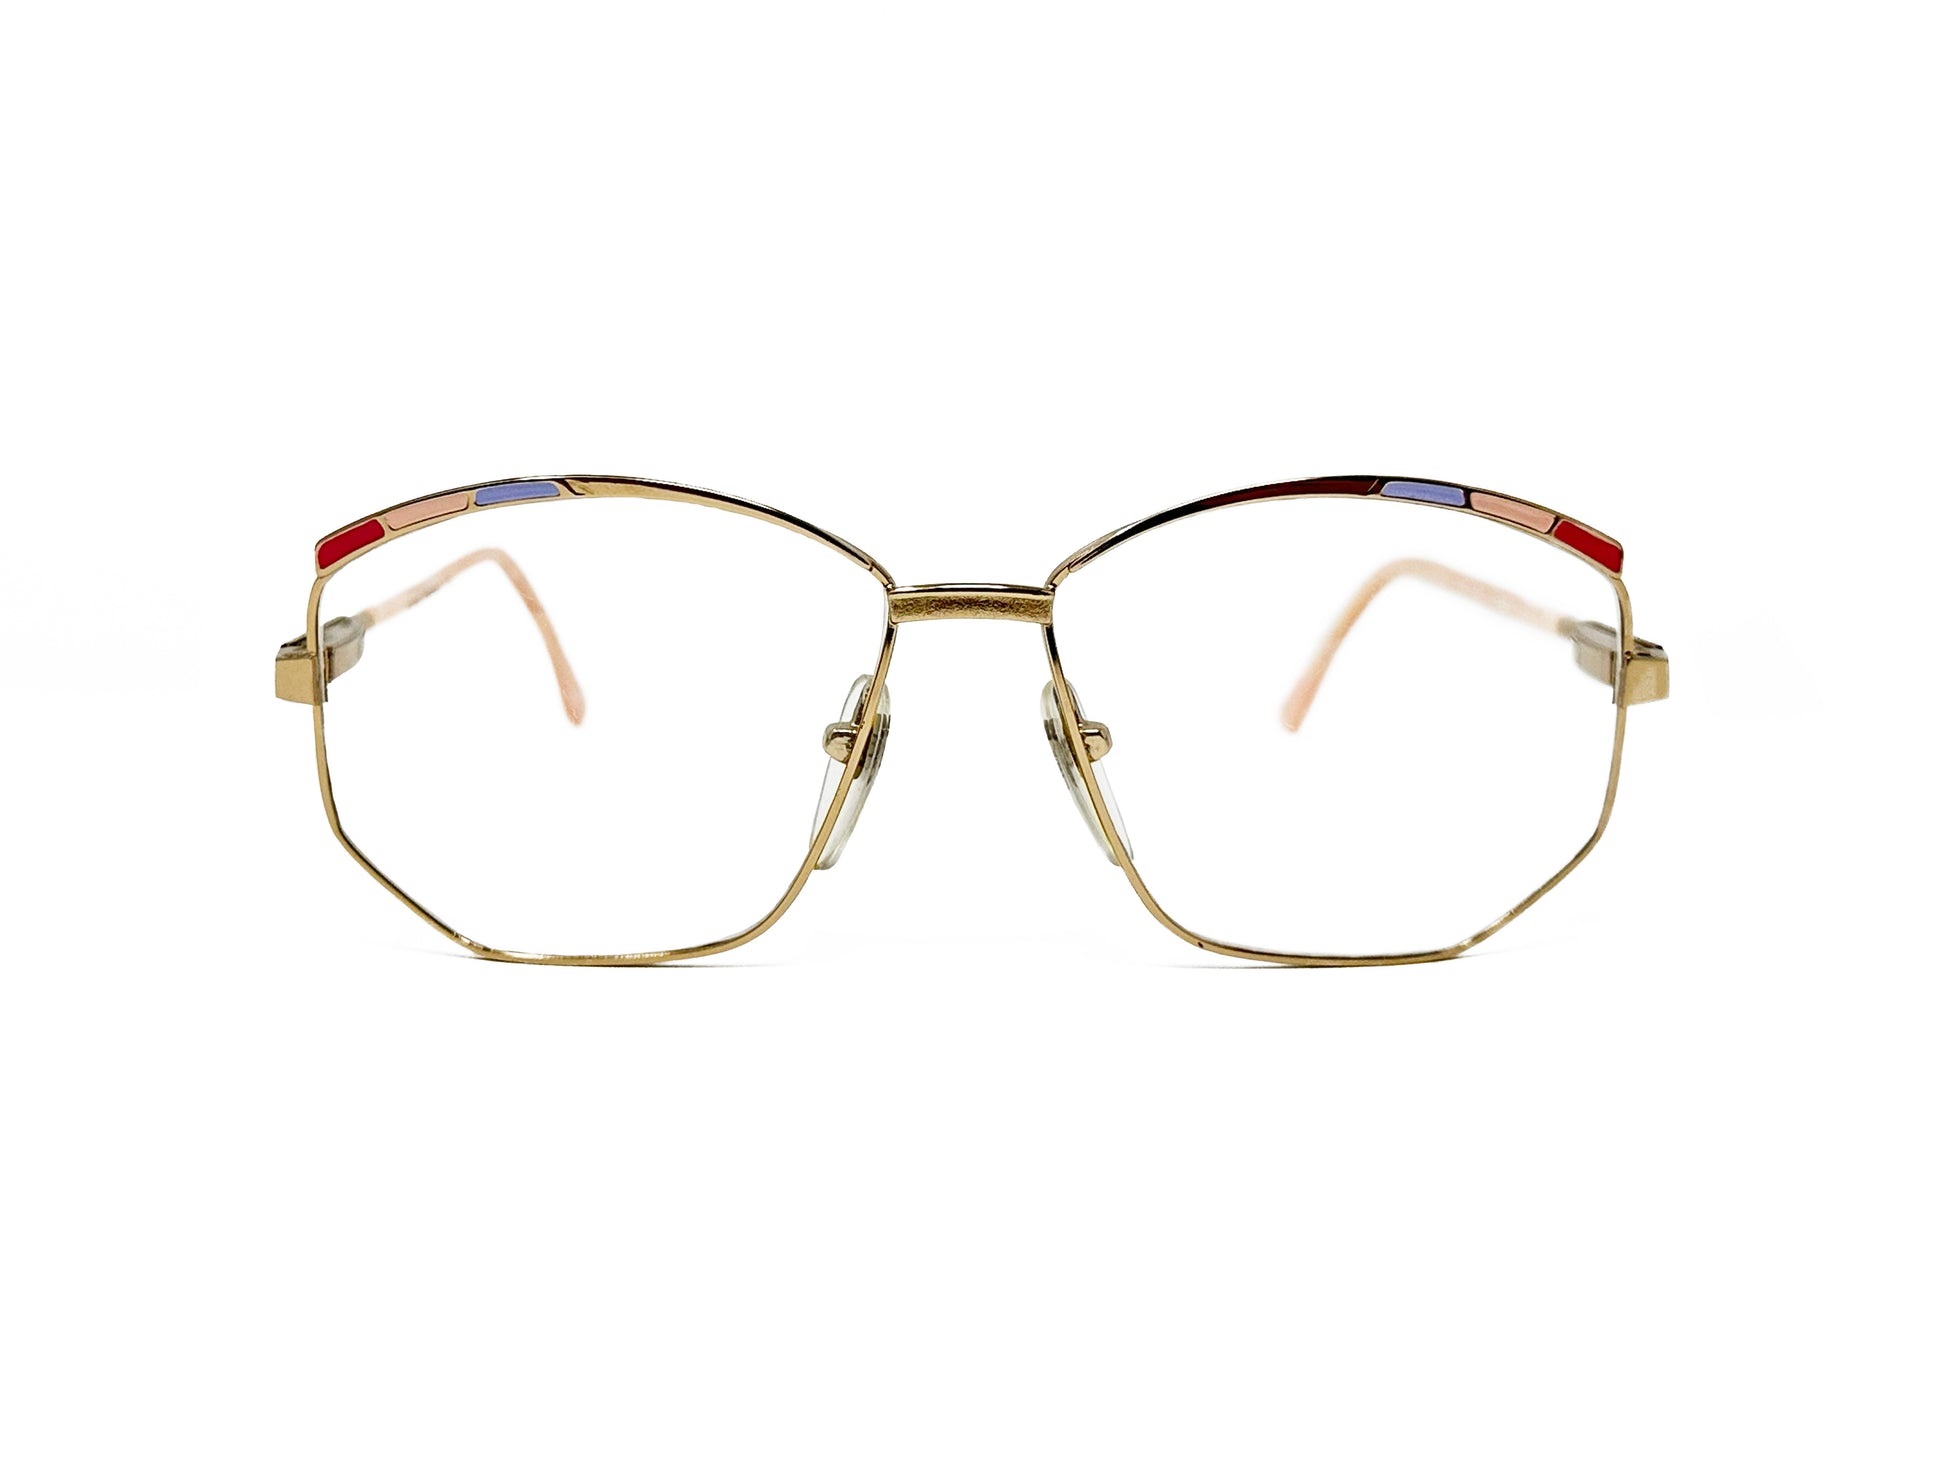 Zollitsch angled-butterfly, metal optical frame. Model: 527. Color: Gold - Gold metal with blue,pink, and red accents on top right corner of frame. Front view. 